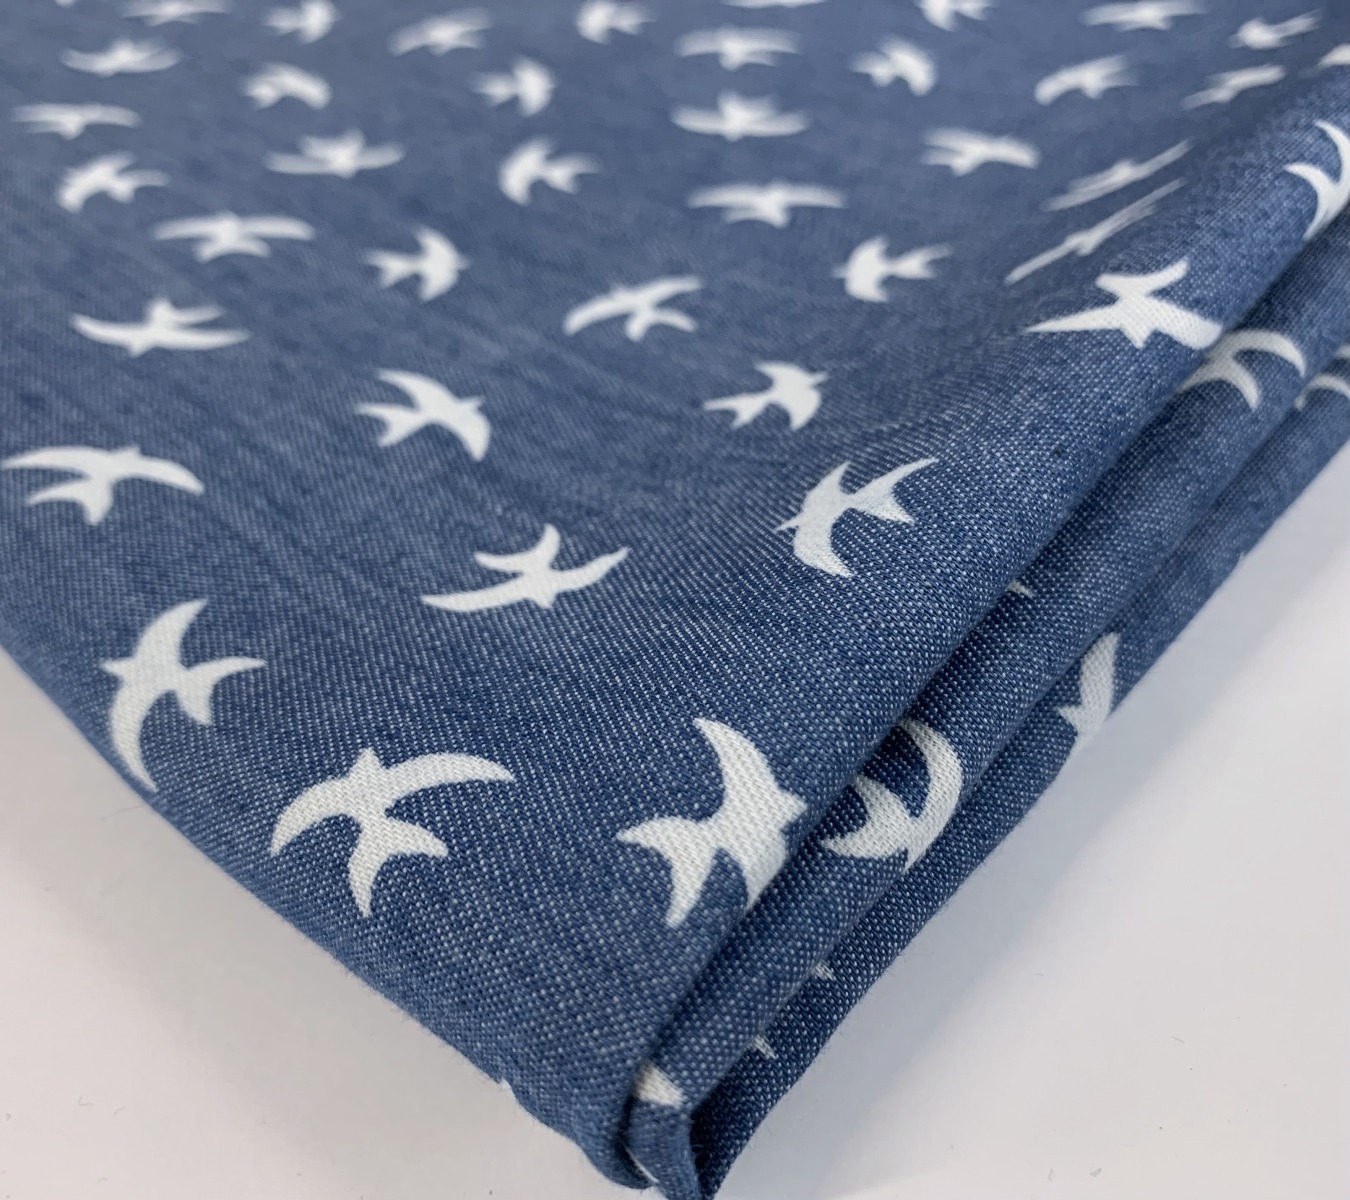 Printed Denim Chambray Fabric Mid Blue - Heavenly - Dove